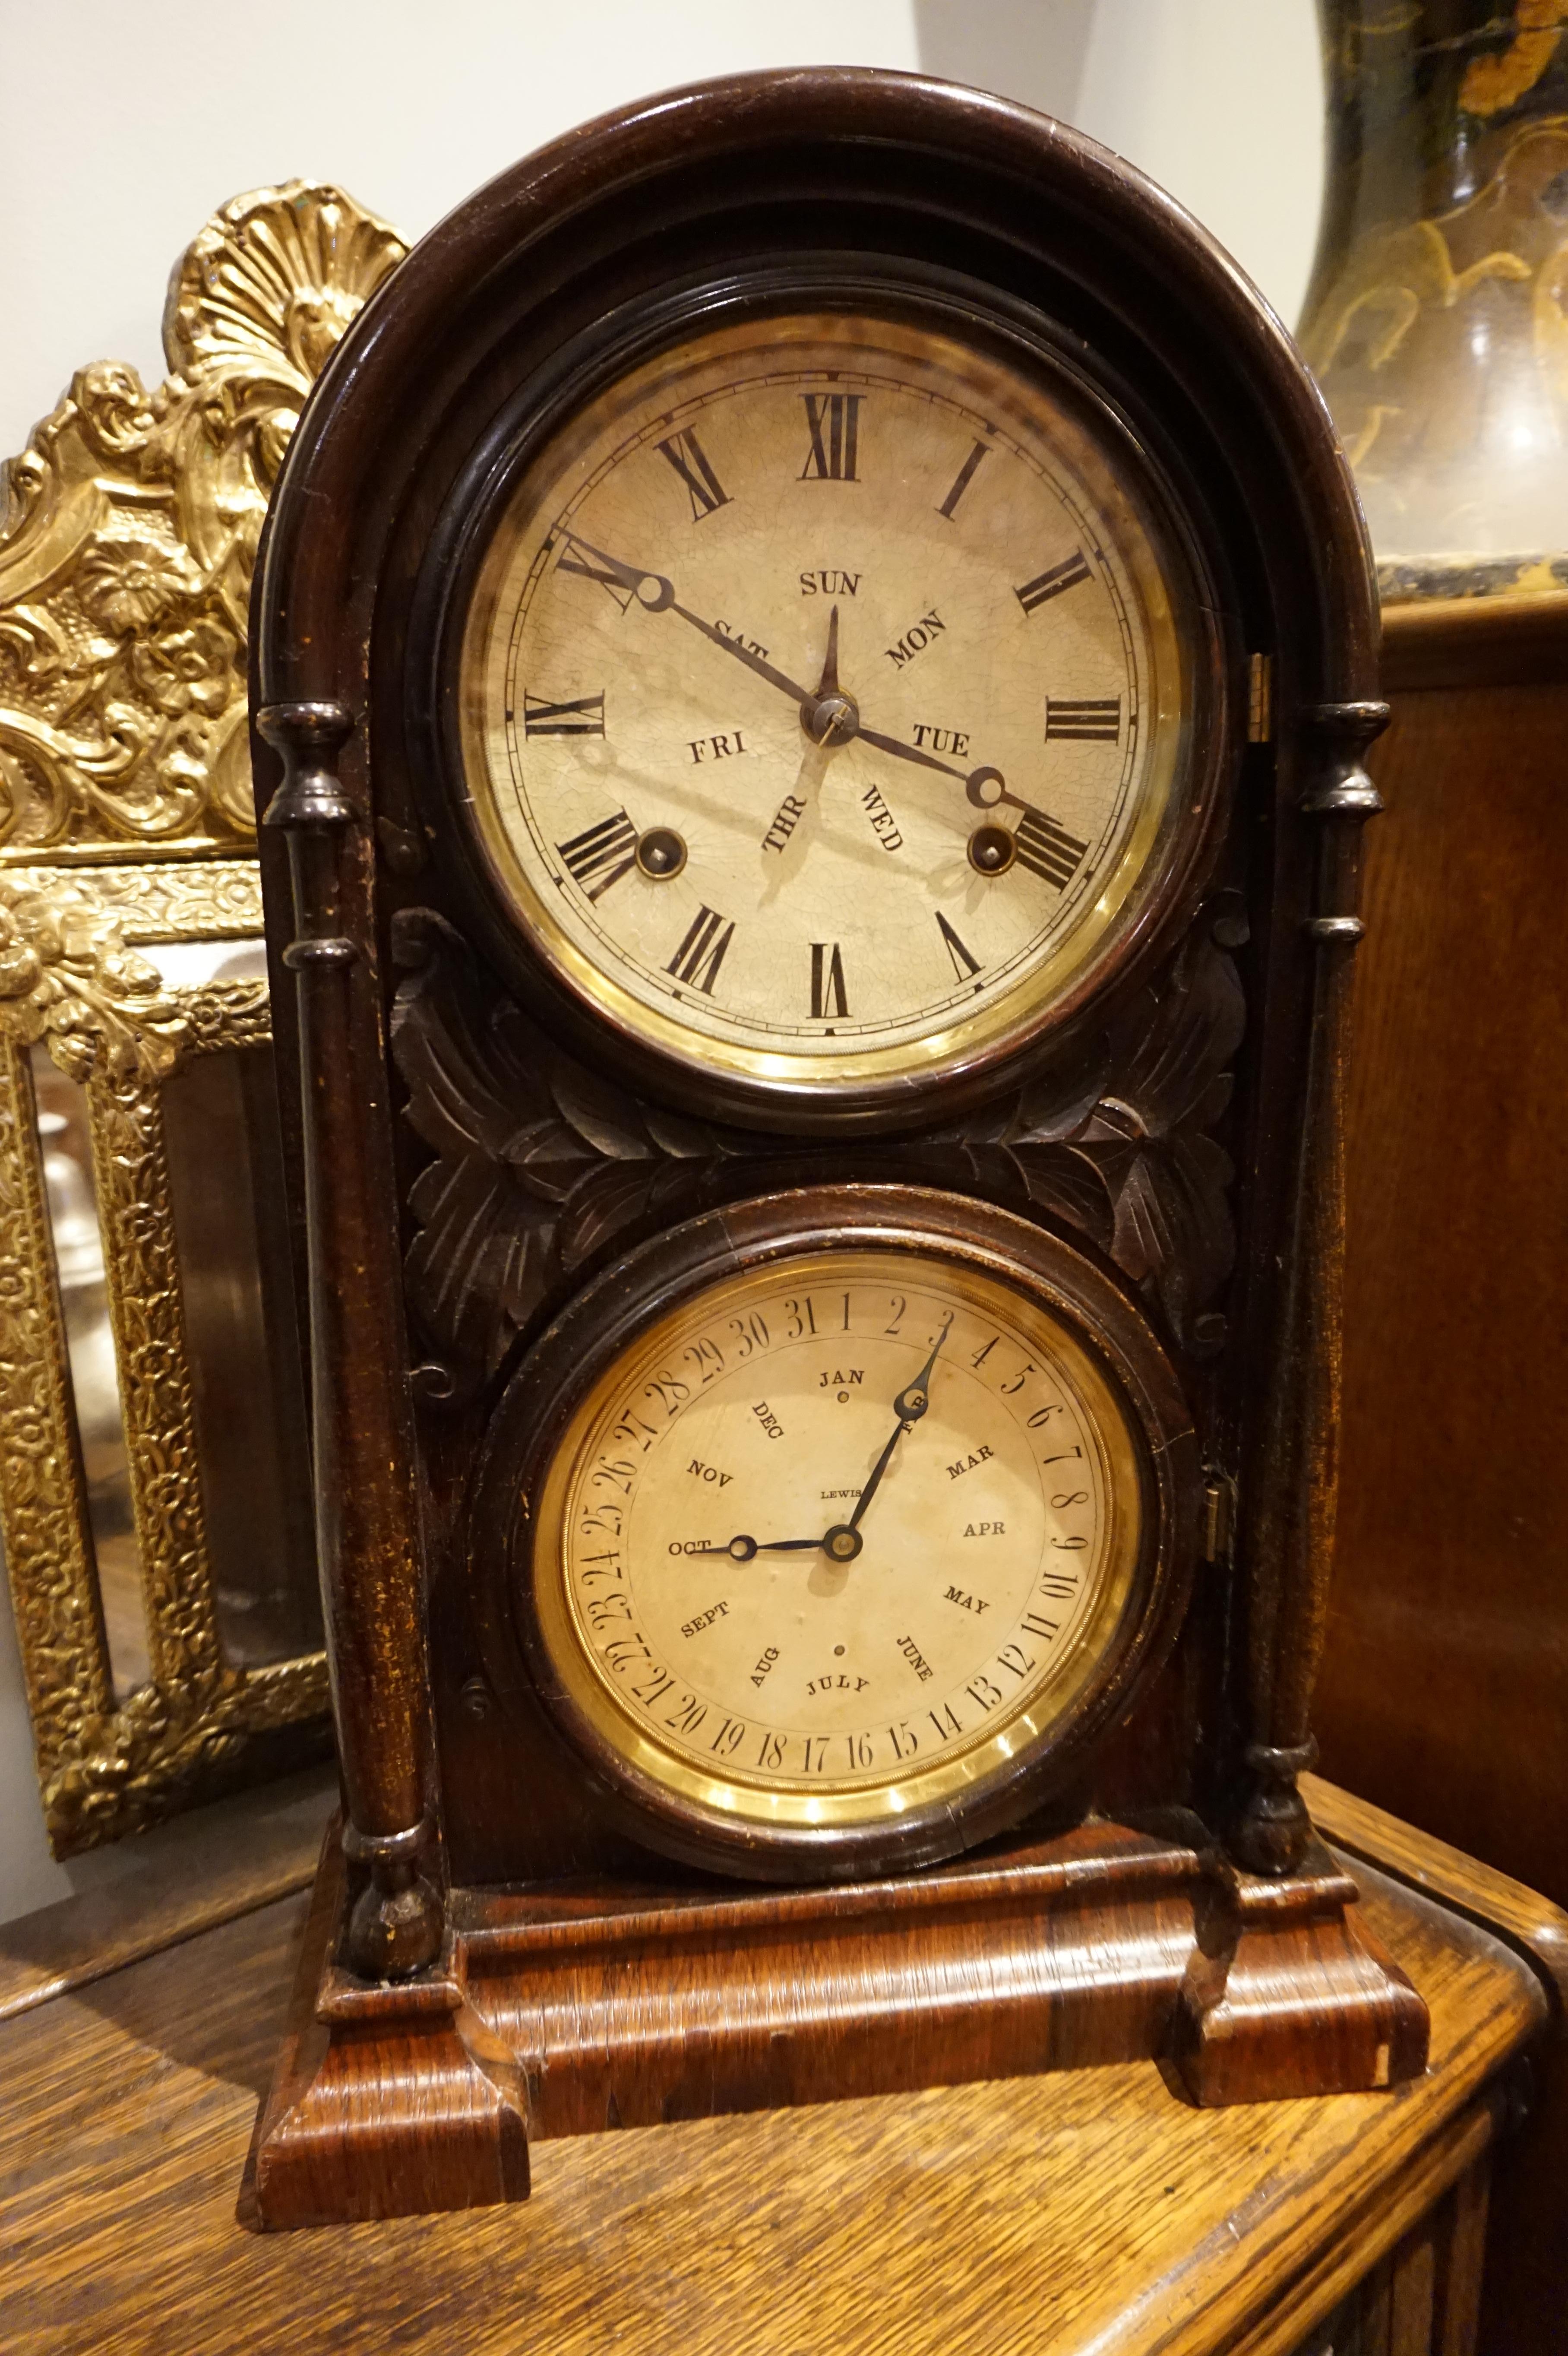 Hand carved case and original dial patination on this charming 8 day clock manufactured in Bristol Connecticut. Keeps good time and strikes hourly. Instructions posted at rear as shown. Oozing with character and old world charm.